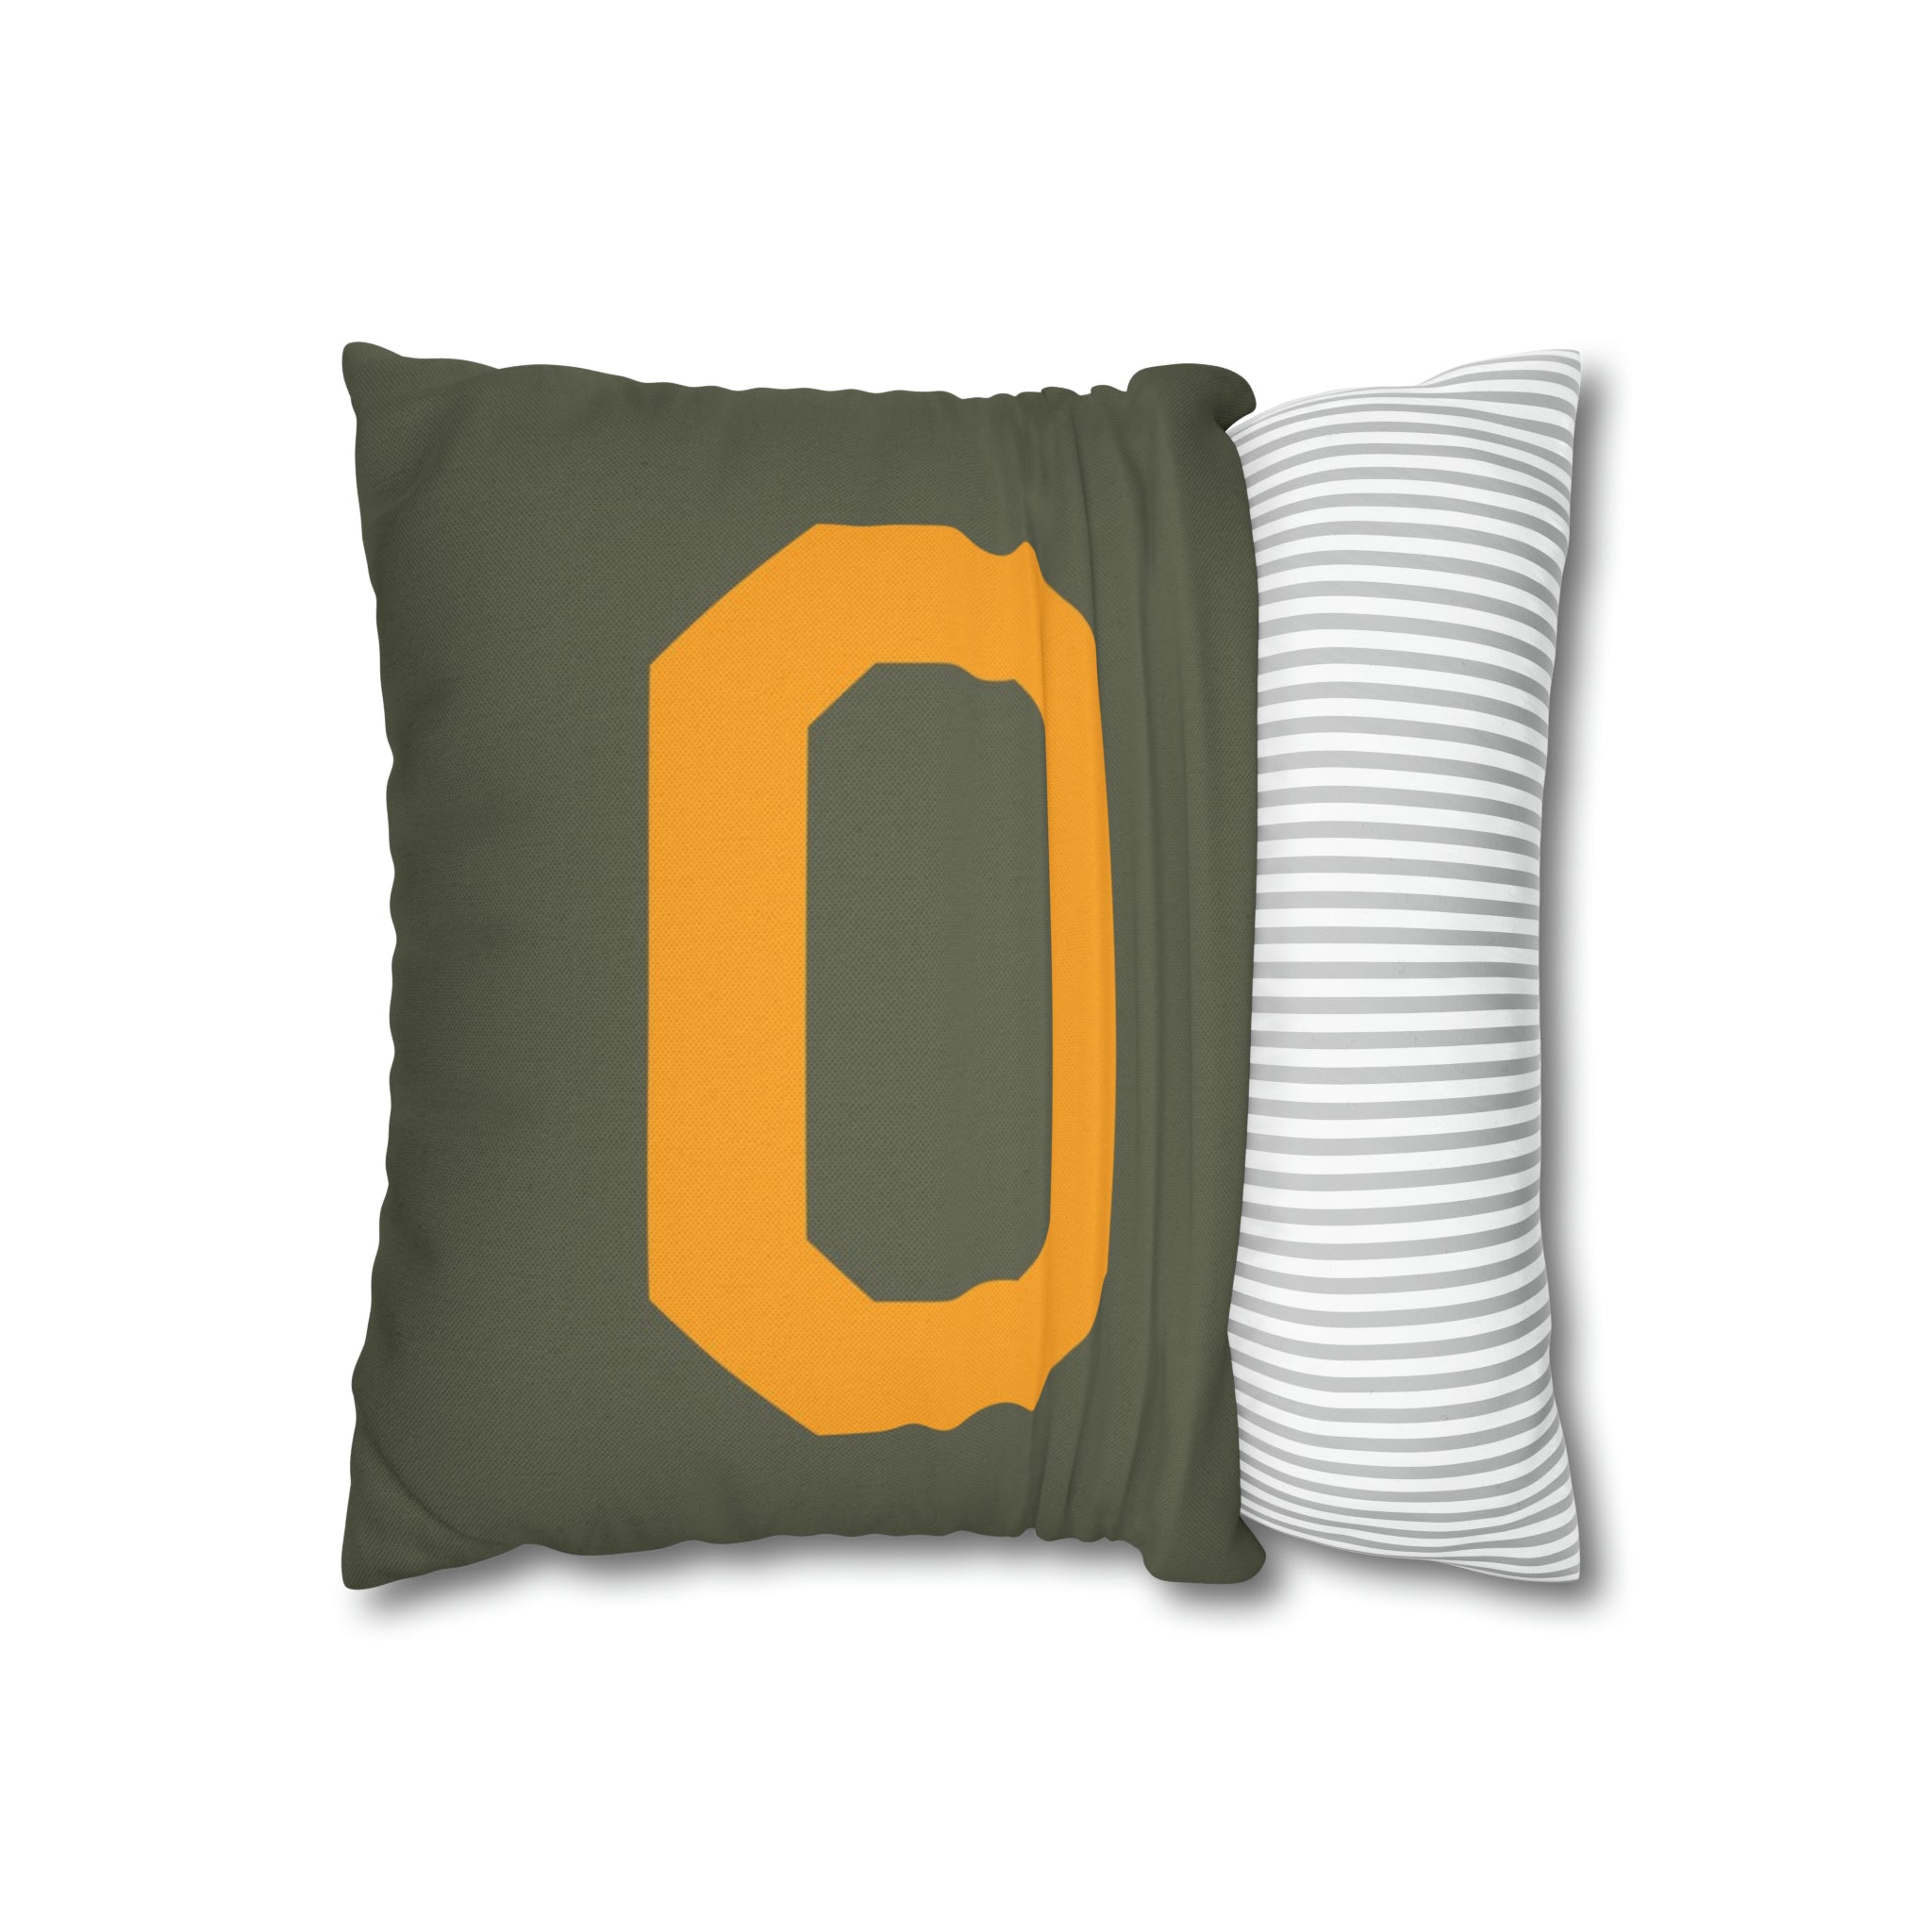 WWII USAAF Number "0" Square Pillowcase - I Love a Hangar